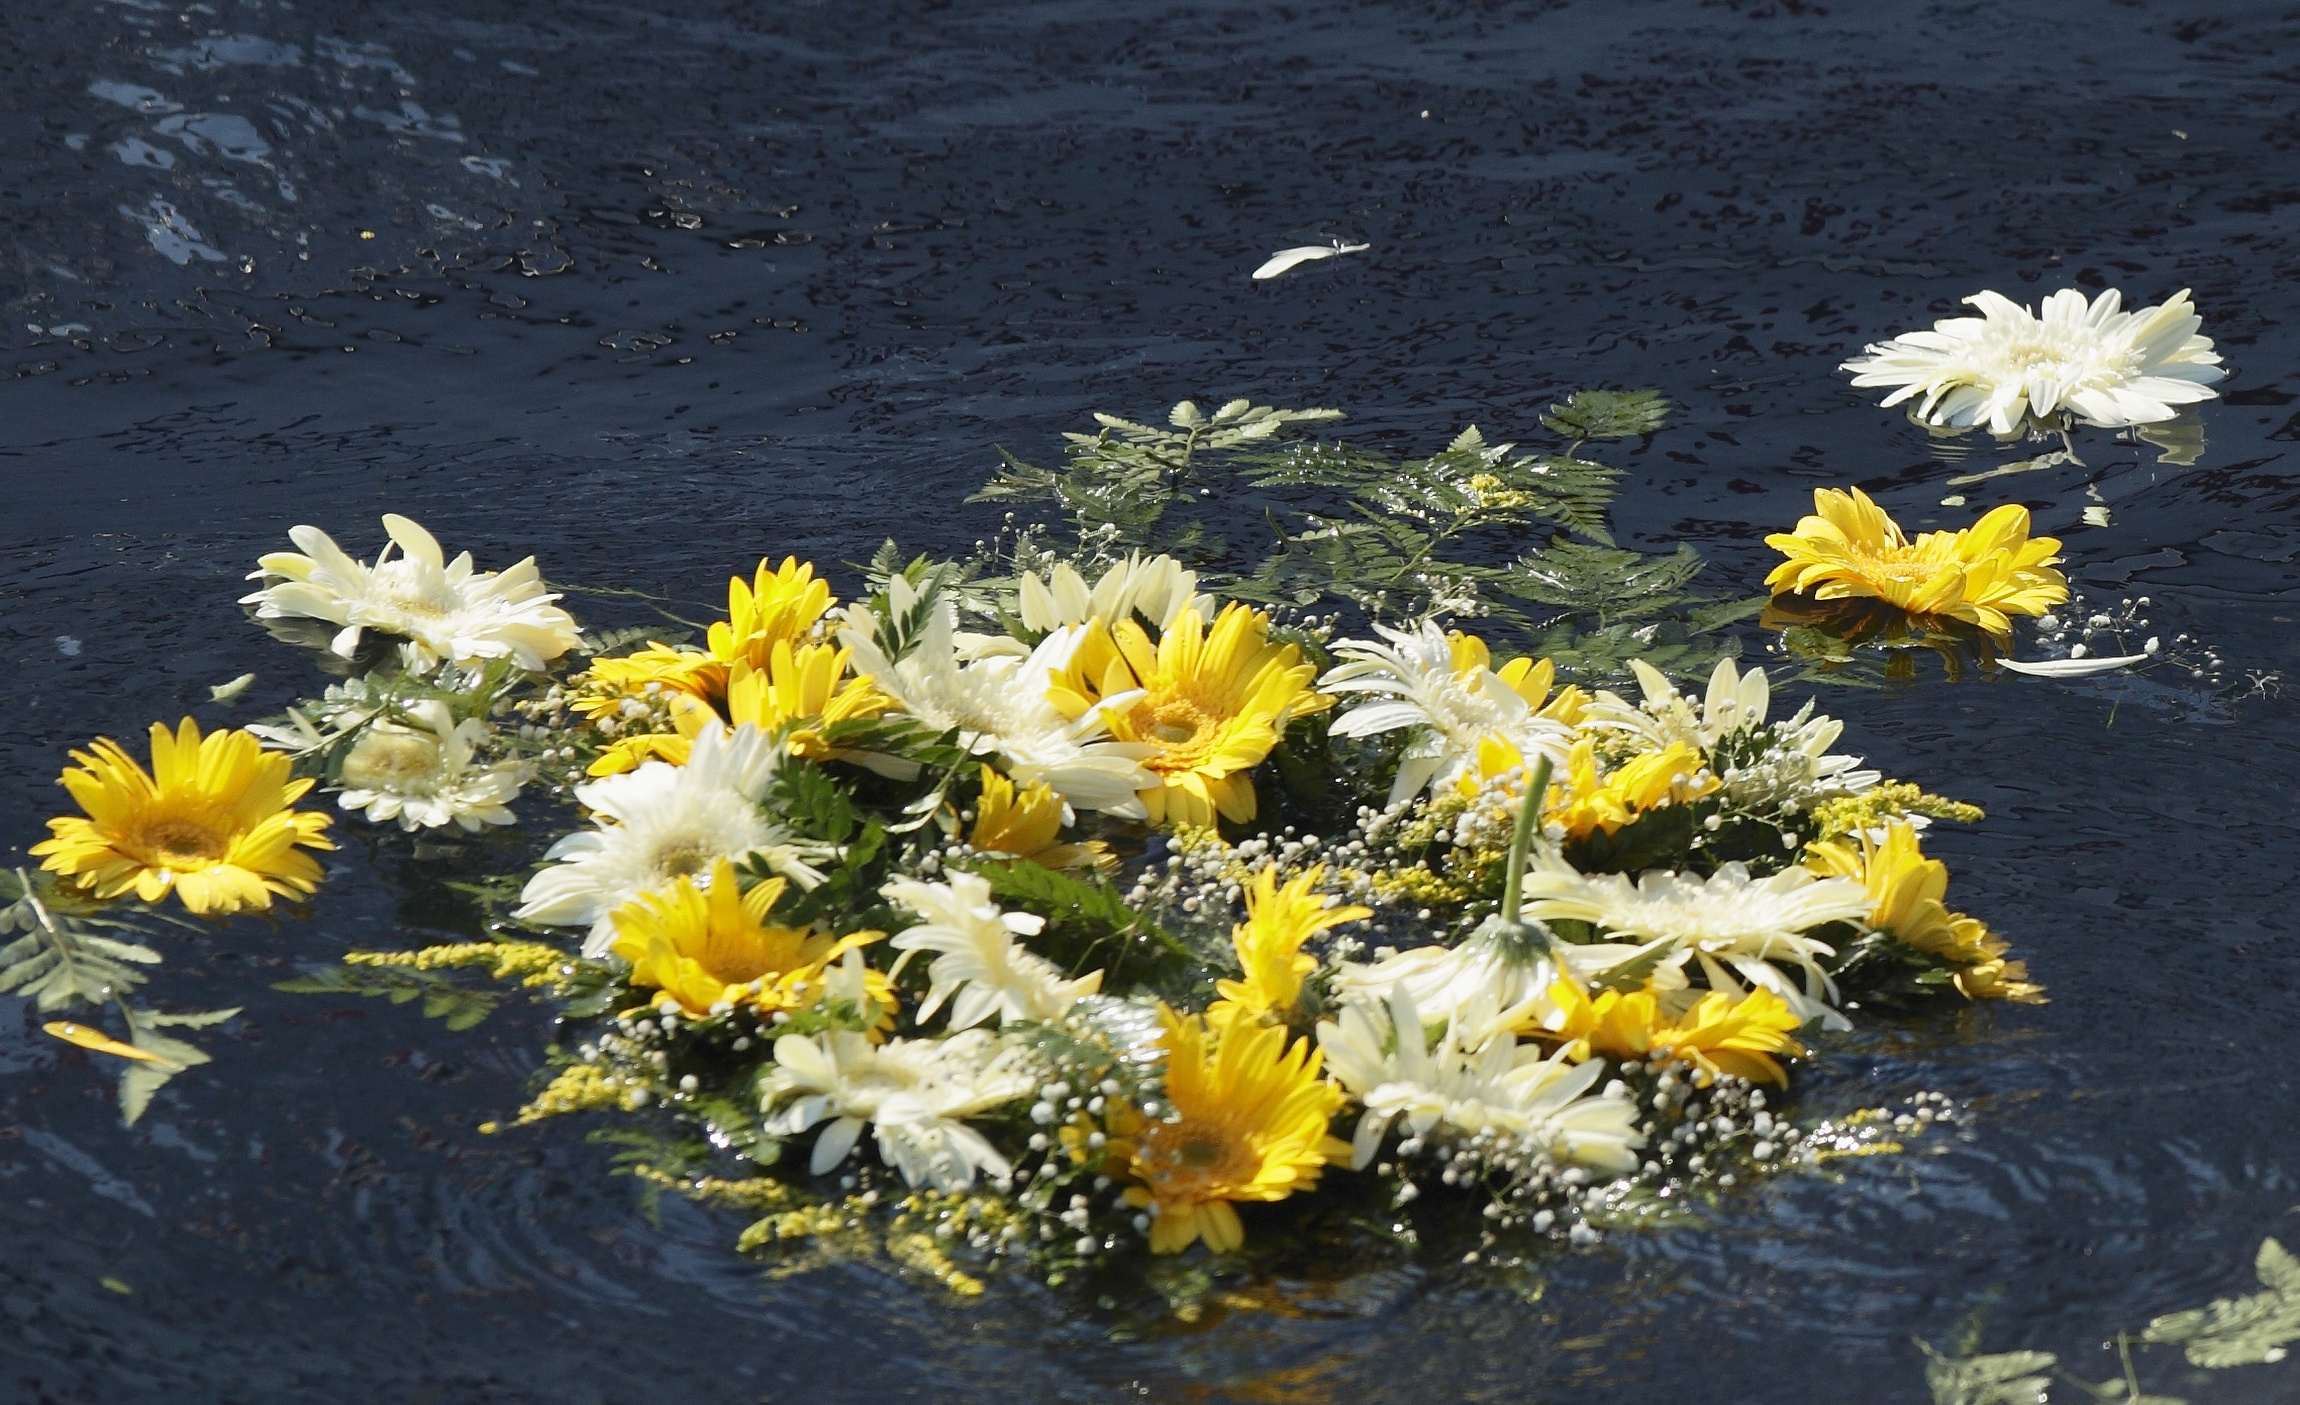 Image: A wreath of flowers thrown by Pope Francis floats in the Mediterranean Sea in the waters off the Italian island of Lampedusa in this July 8, 2013, file photo. 